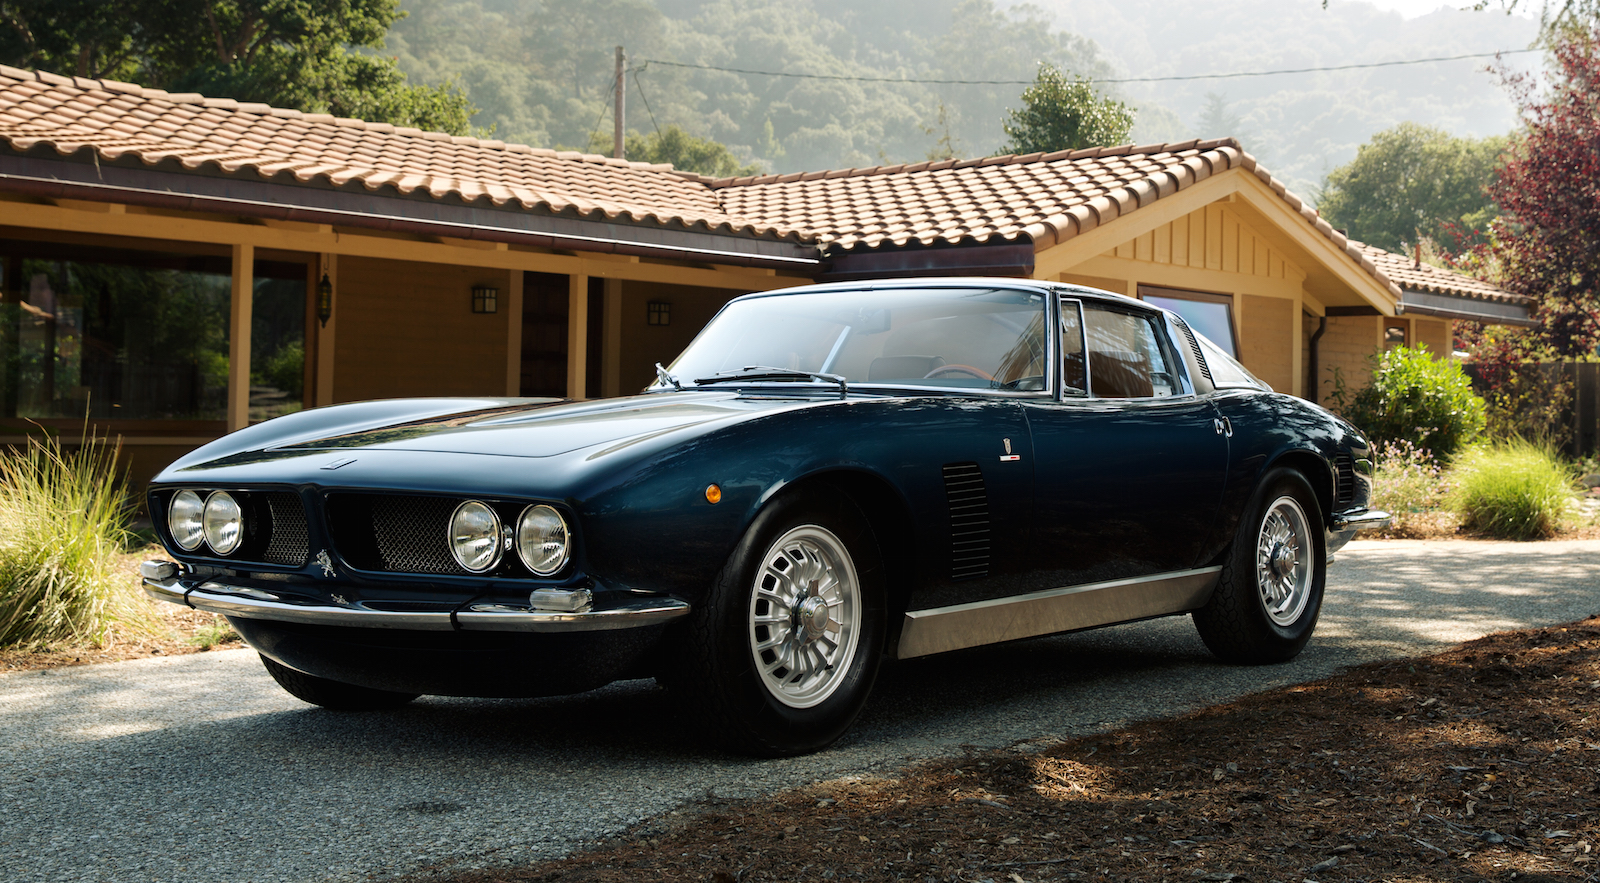 Iso Grifo For Sale - (1966 Series I)